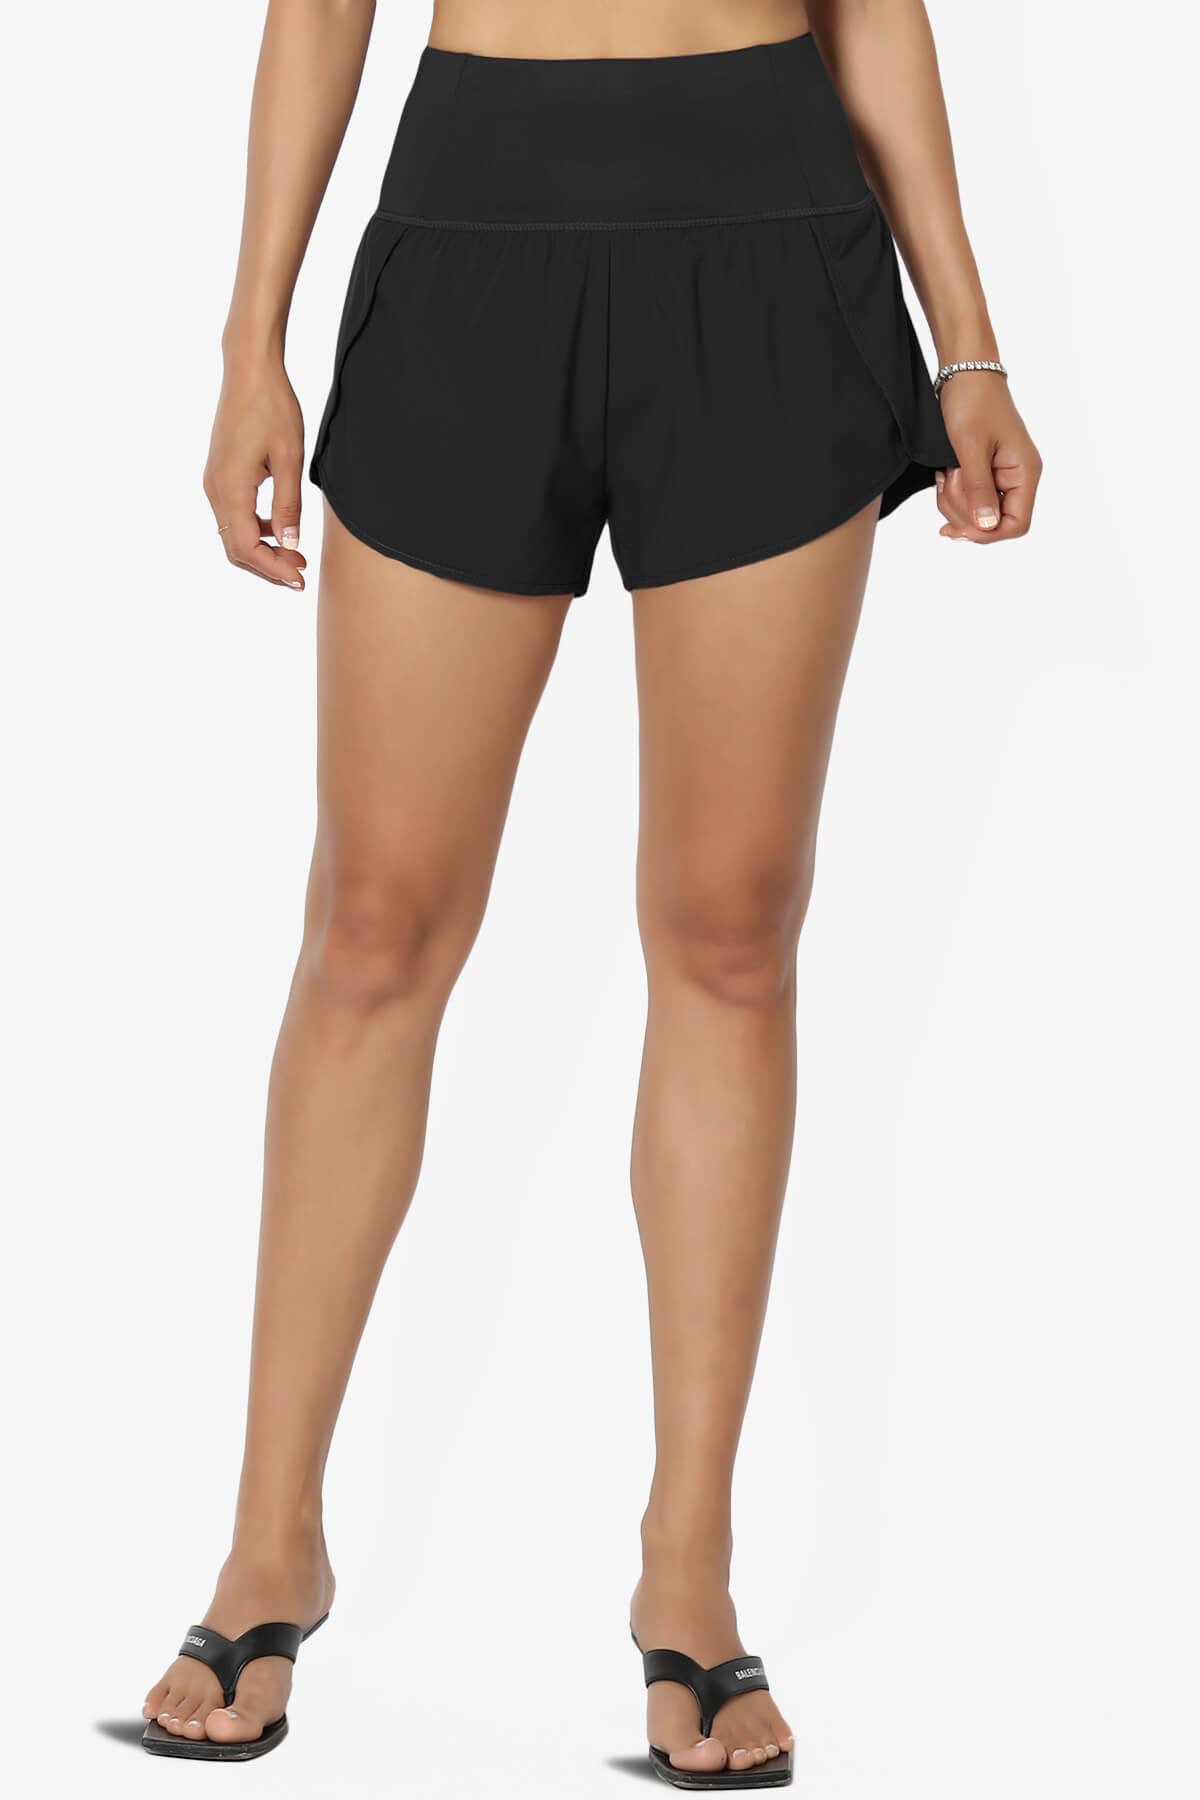 Manzie Track And Field Brief Lined Running Shorts BLACK_1